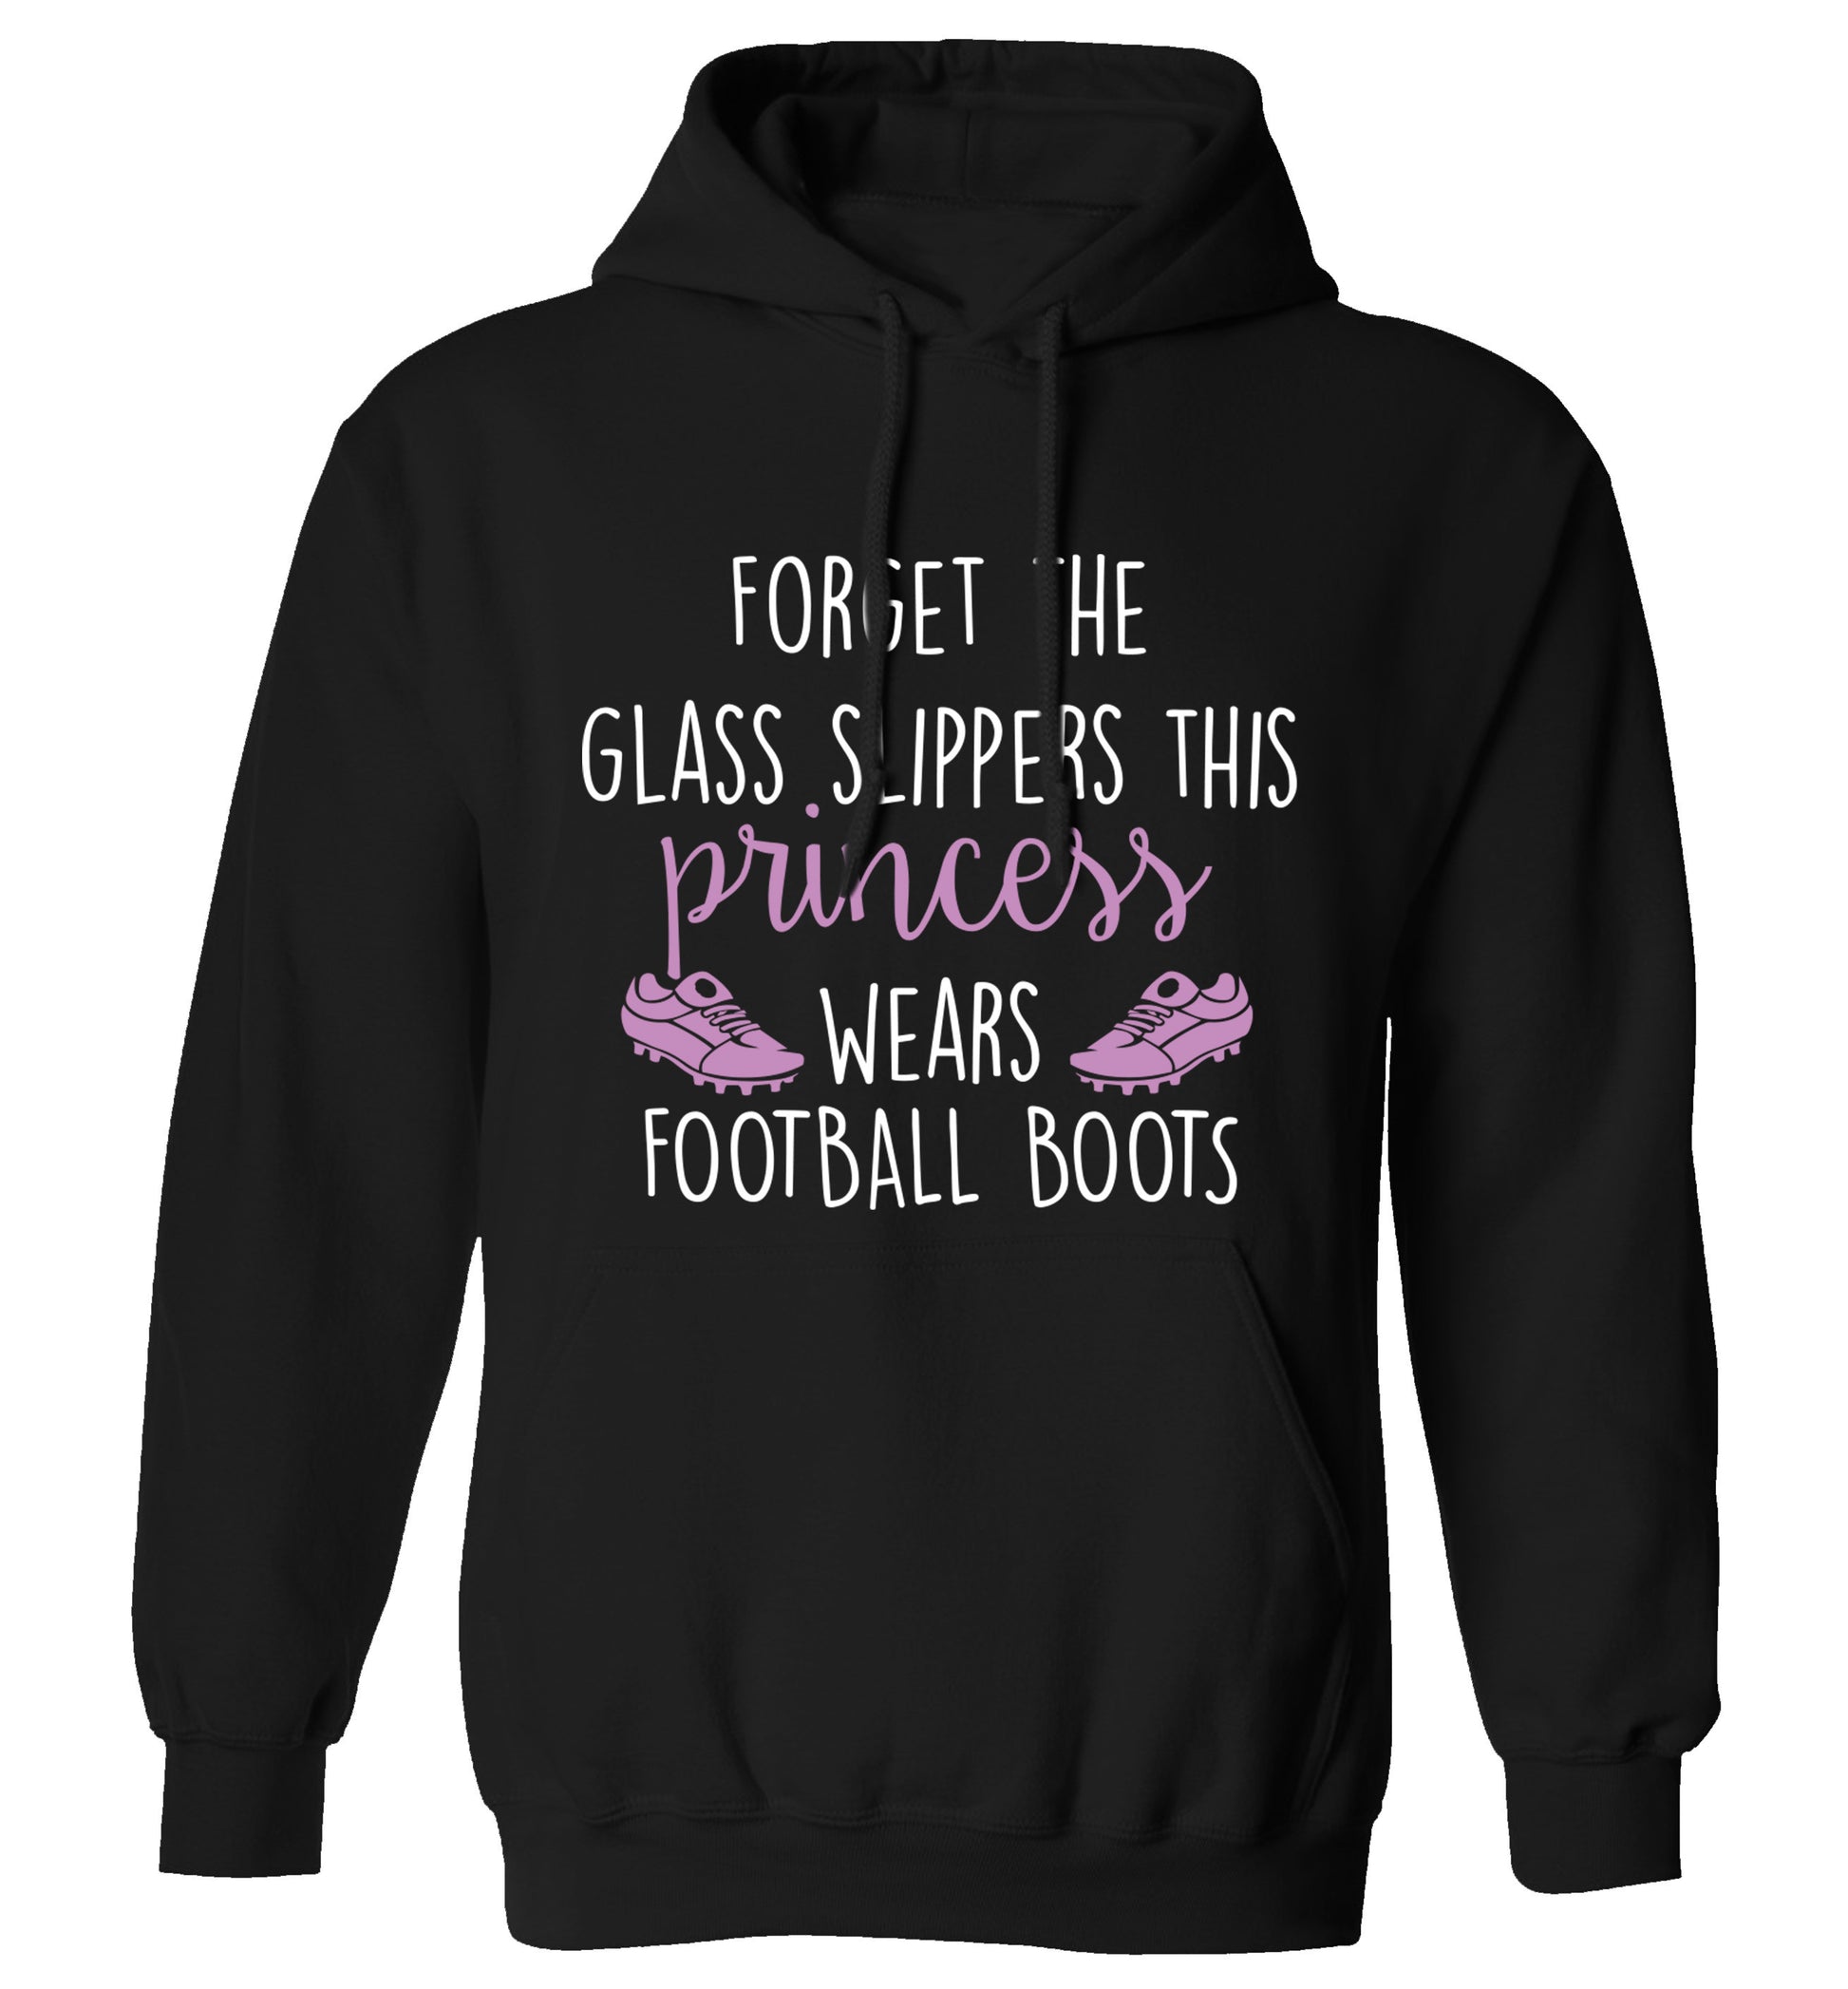 Forget the glass slippers this princess wears football boots adults unisex black hoodie 2XL